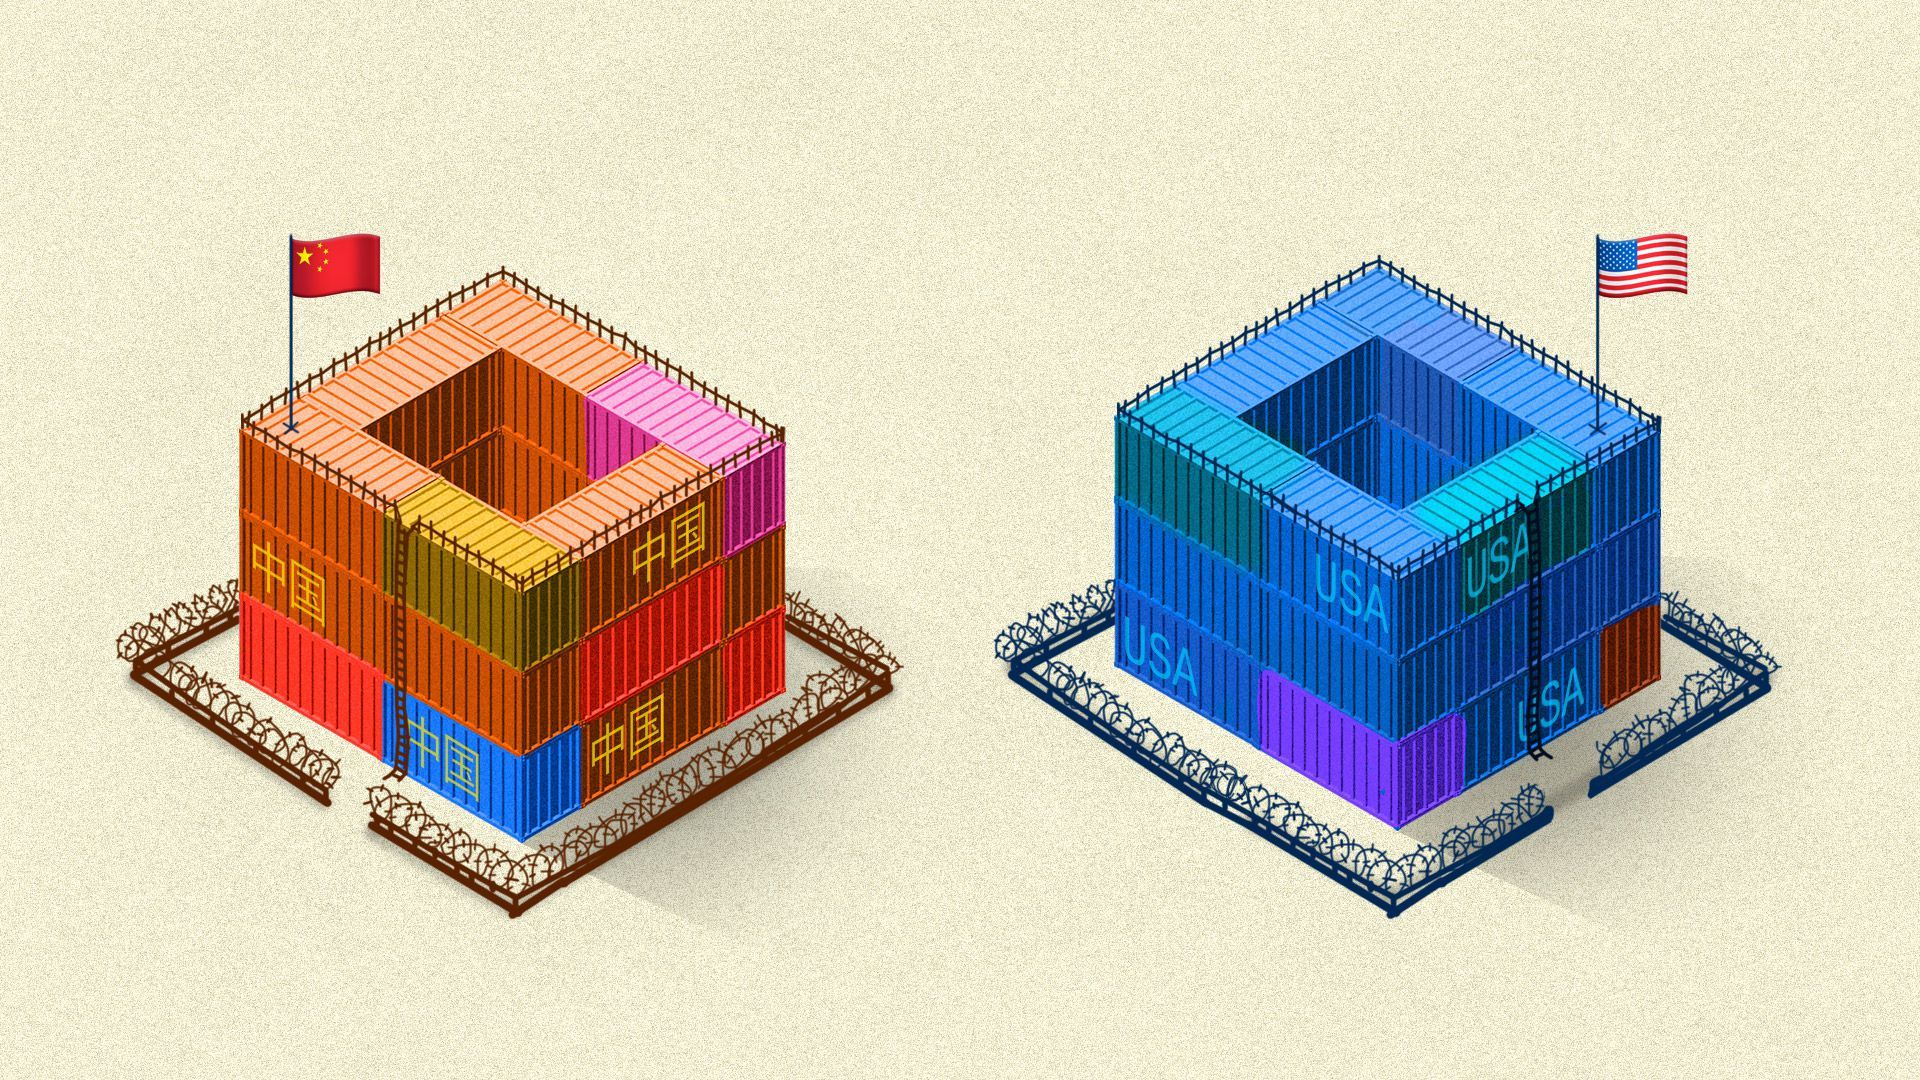 Illustration of China and U.S. shipping containers